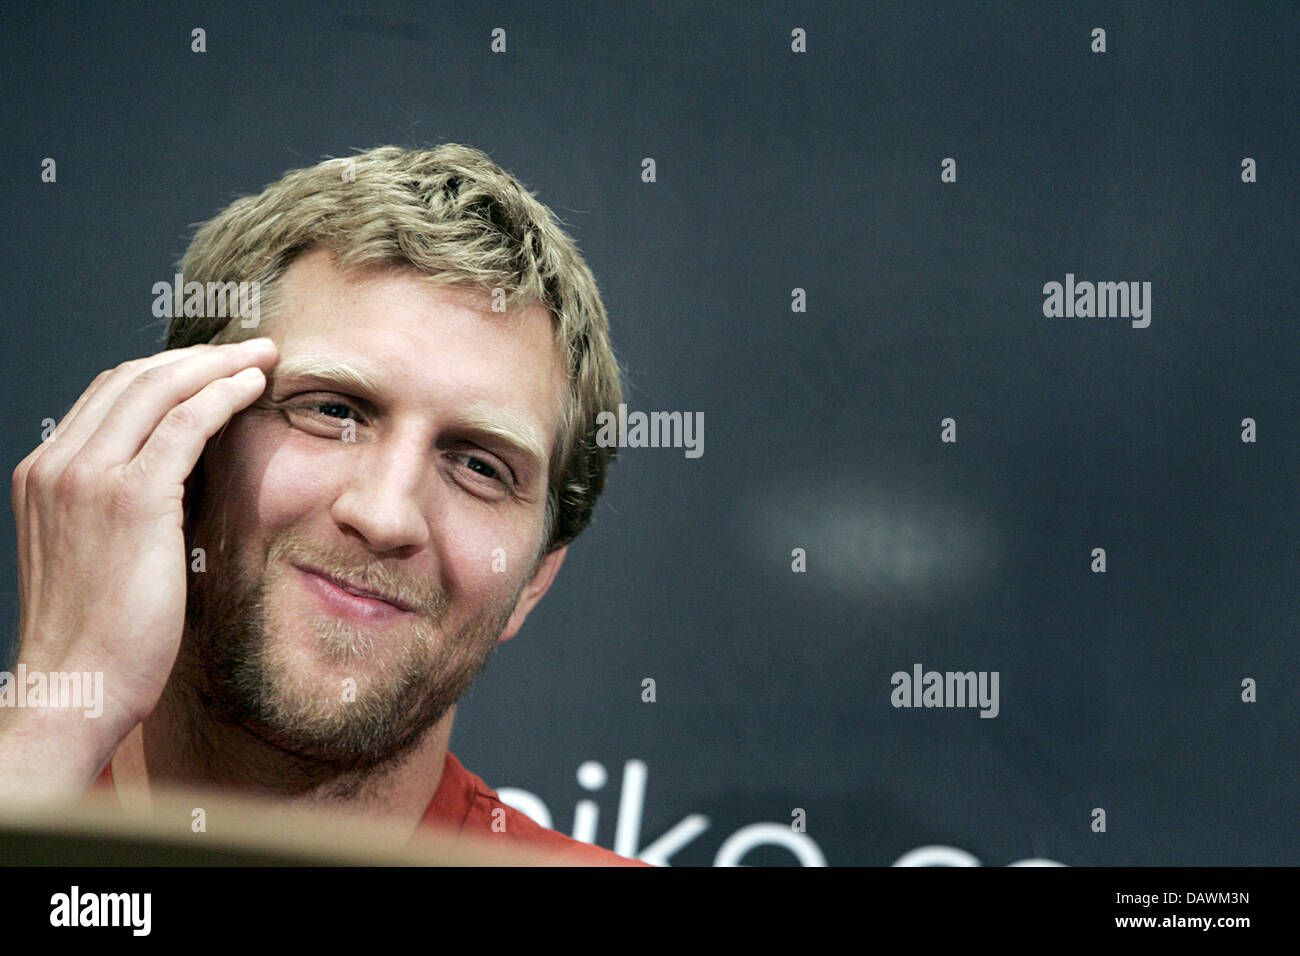 German basketball pro Dirk Nowitzki smiles at a press conference in Frankfurt Main, Germany, 22 May 2007. Nowitzki was elected MVP of this year's NBA season being the first-ever European to be granted this award. Photo: Frank May Stock Photo